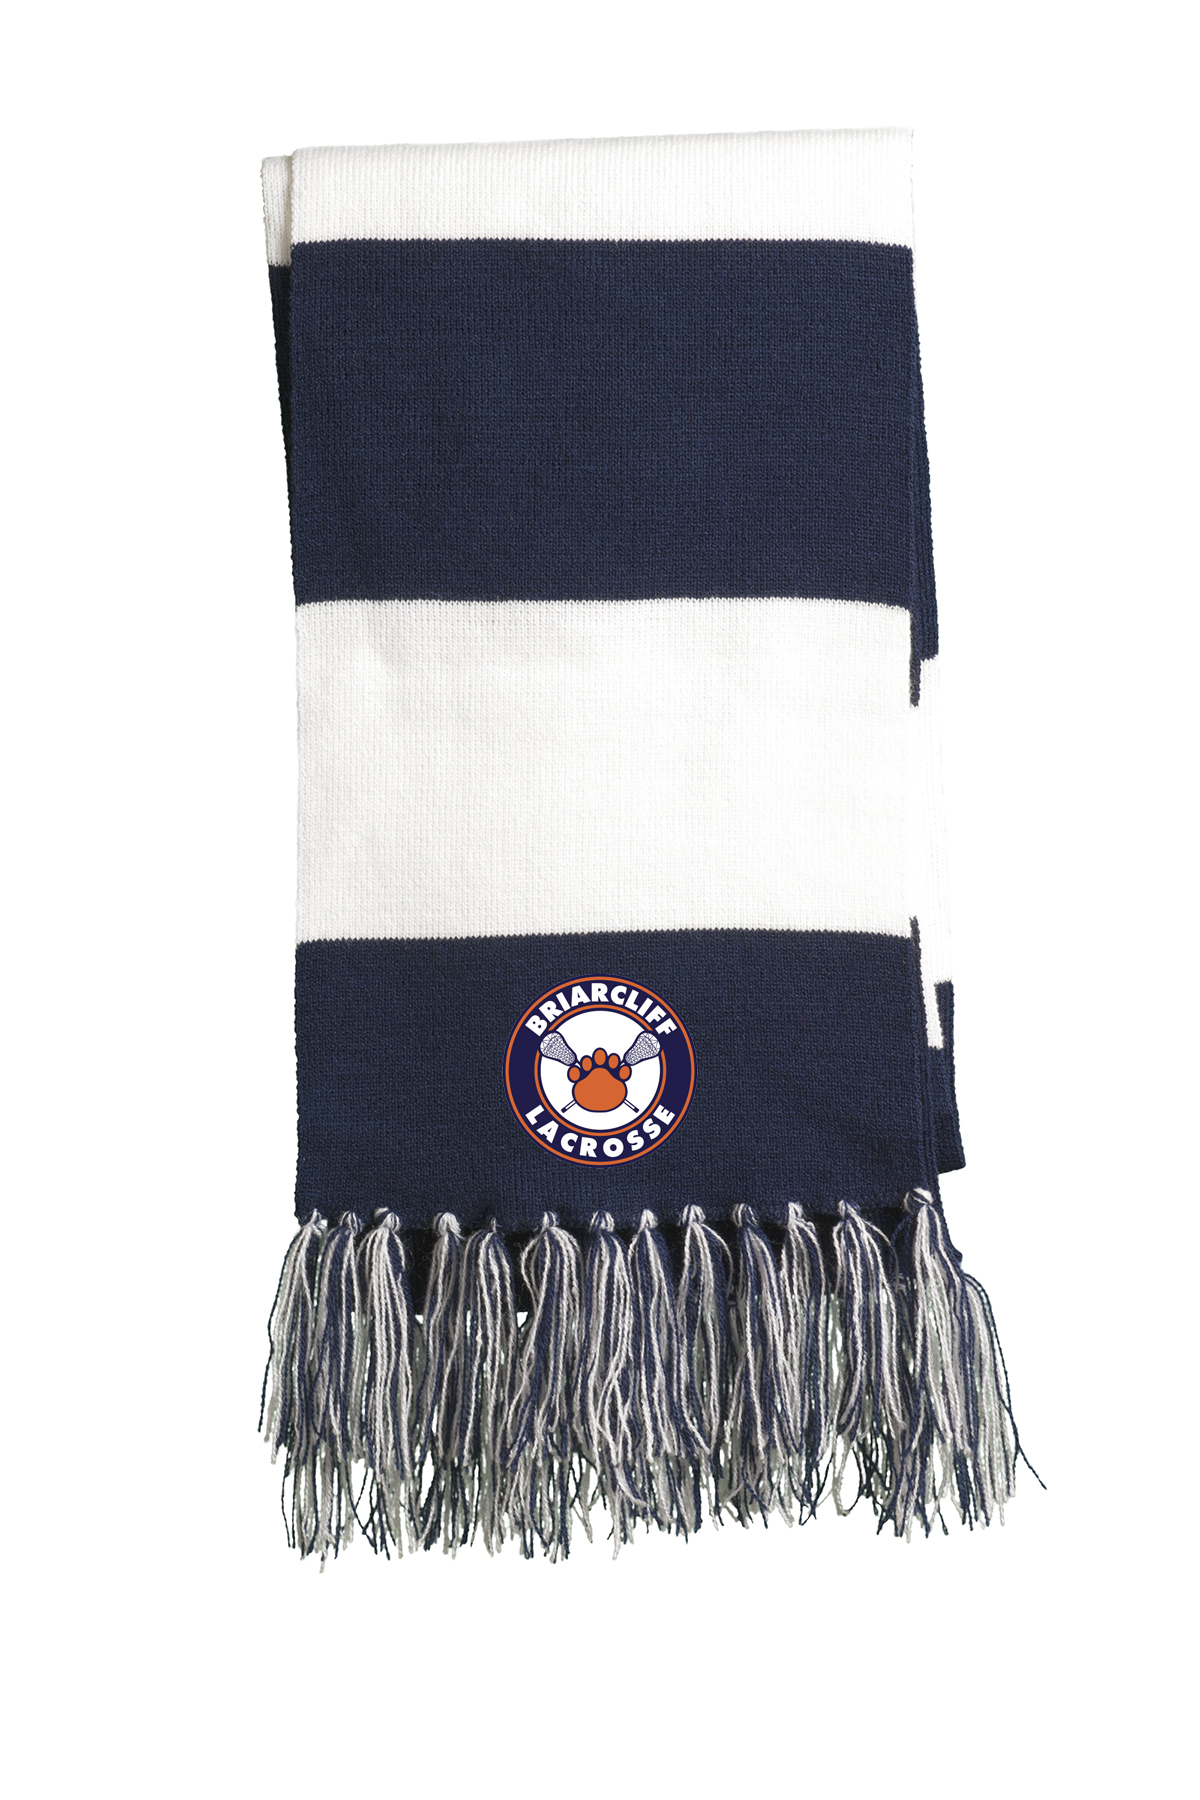 Briarcliff Lacrosse Navy/White Team Scarf